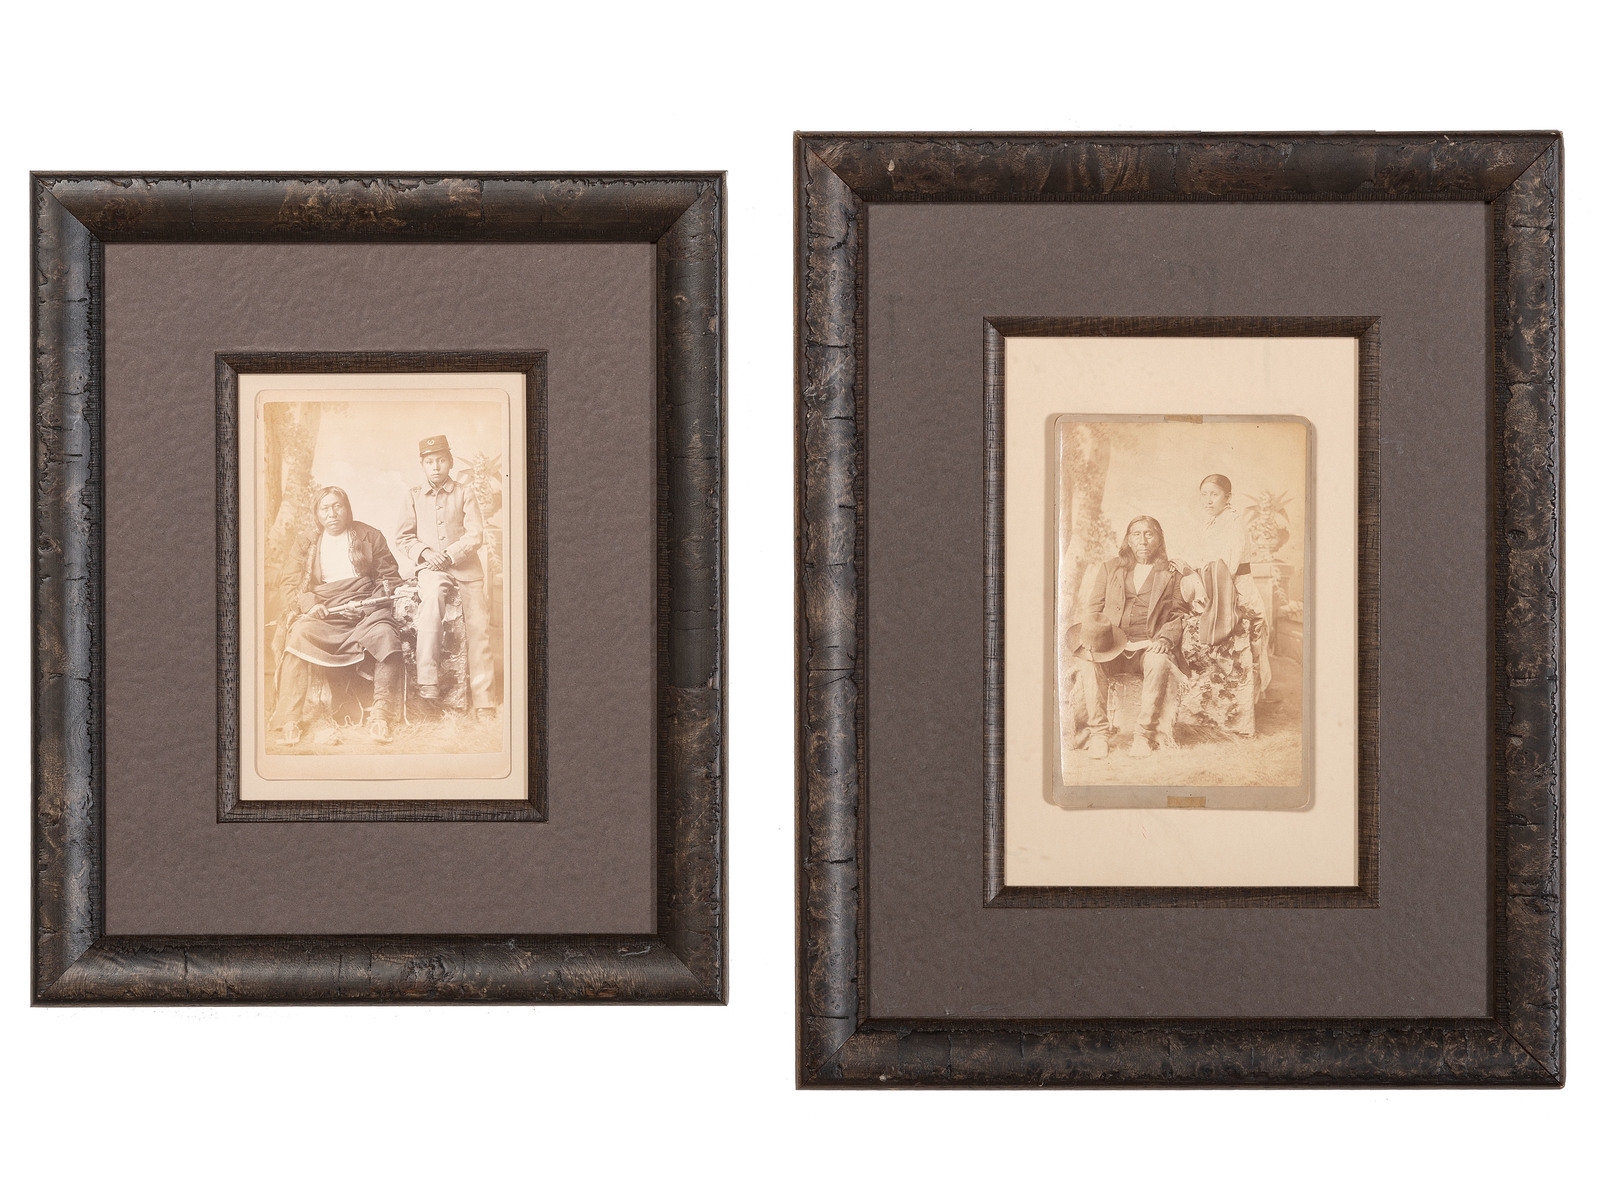 Two cabinet cards featuring Arapaho Chief Little Raven with daughter Anna, and Cheyenne warrior Bobtail Horse with son Joseph by John Nicholas Choate, circa 1880